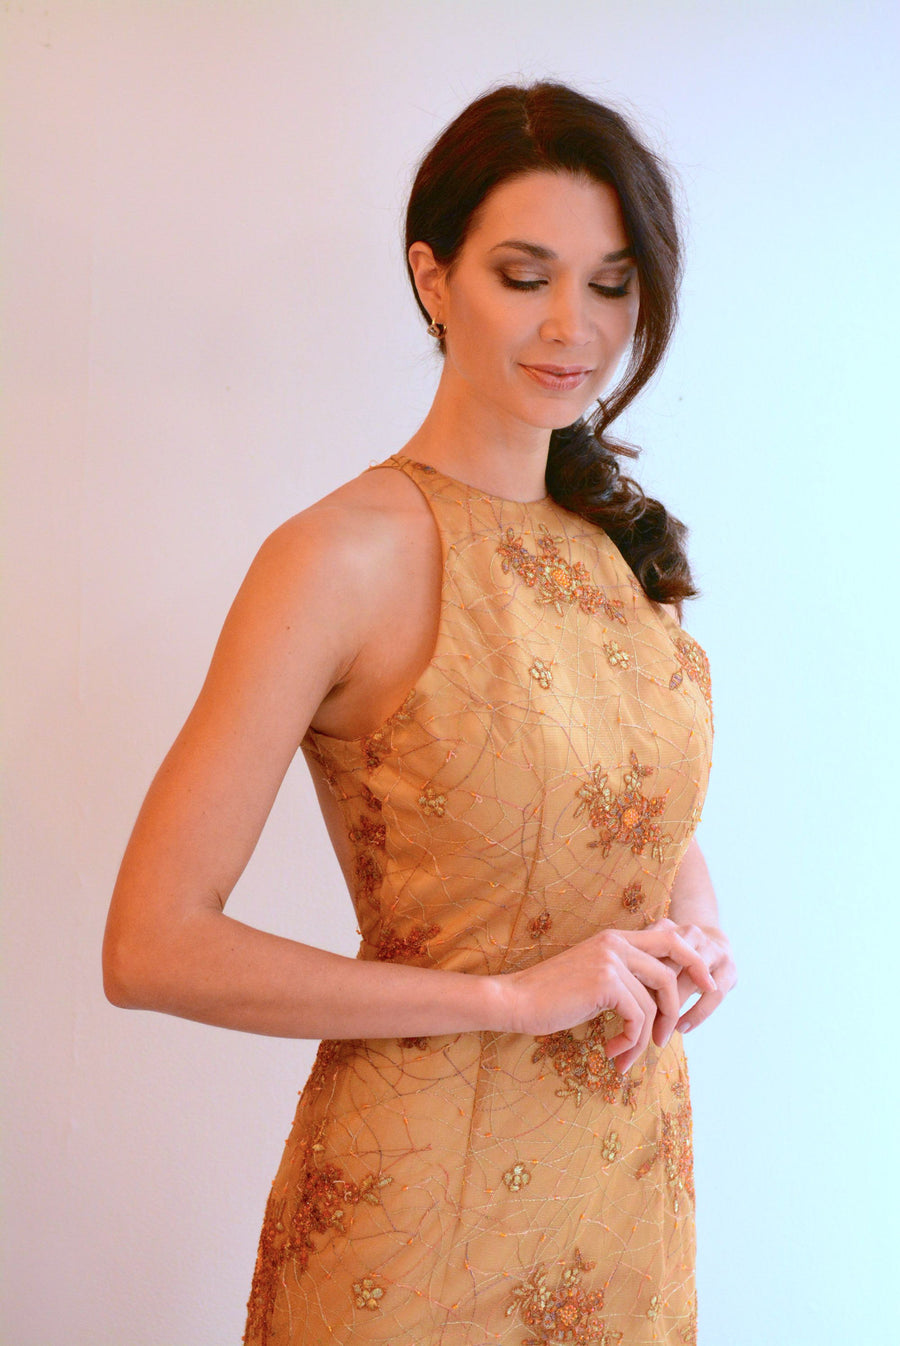 Embroidered Gown